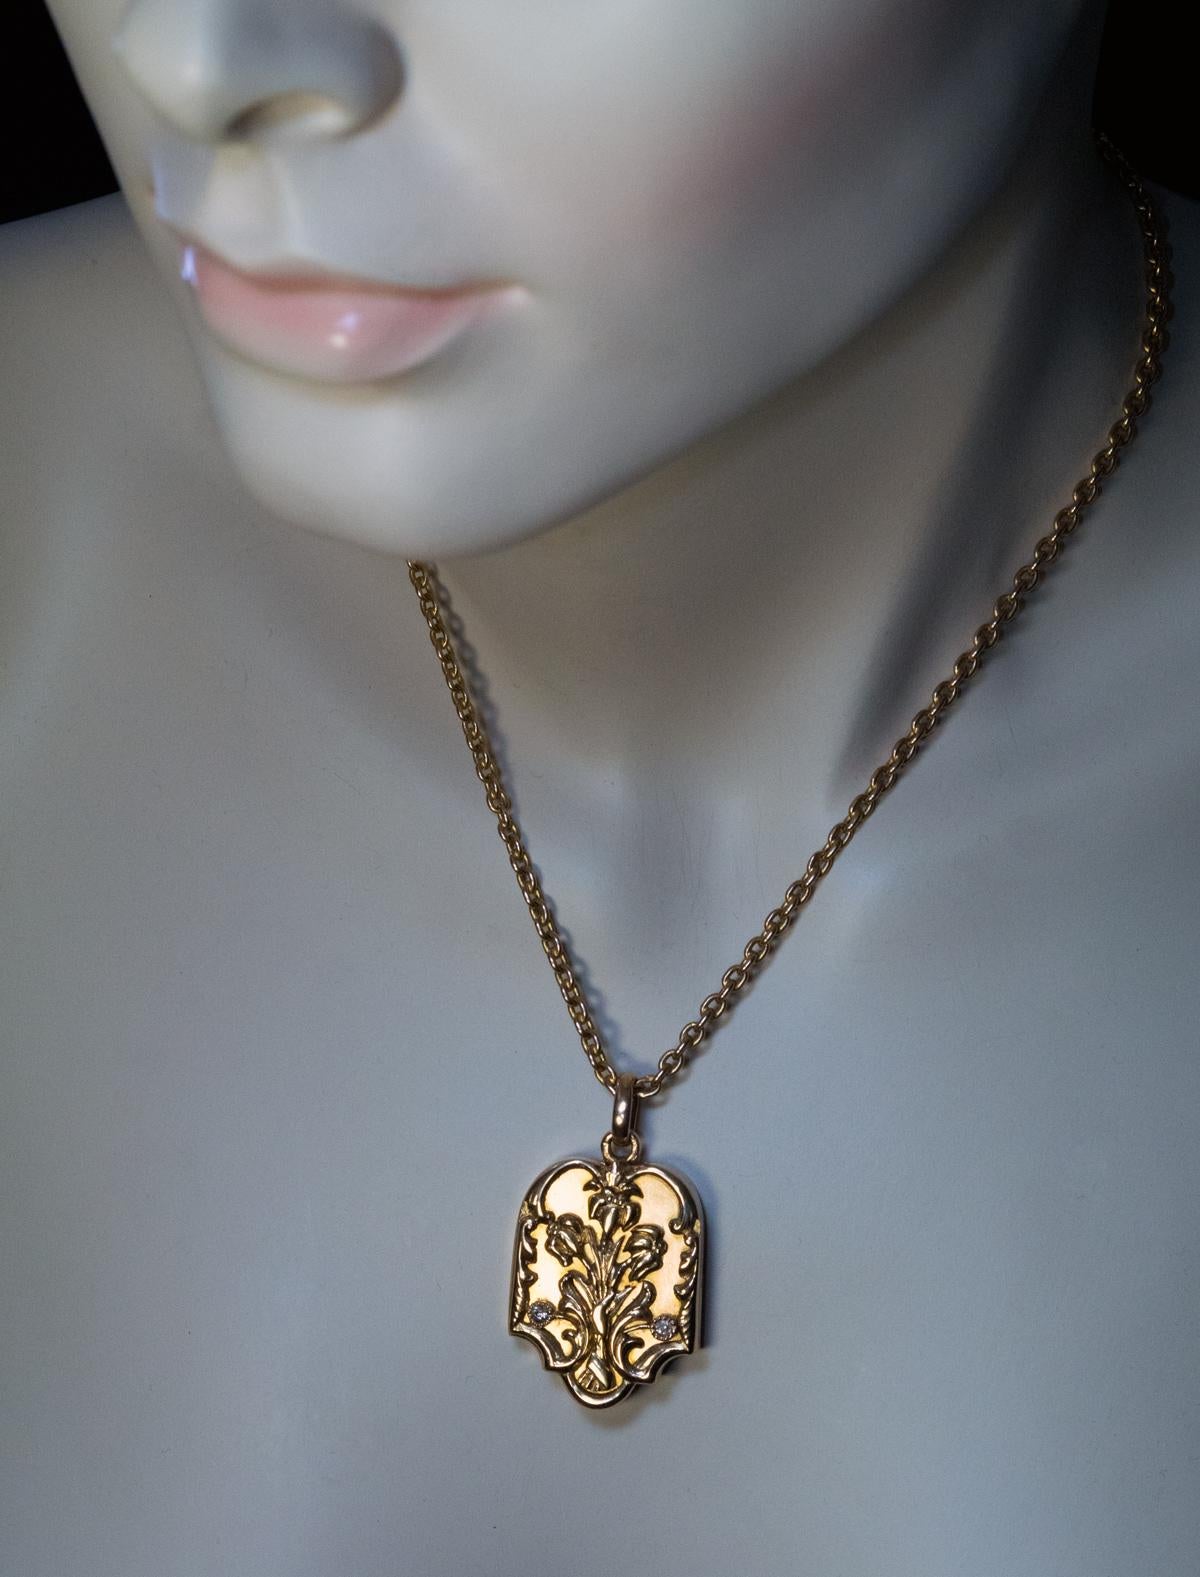 This Tsar Nicholas II era antique Russian gold locket pendant was made in St. Petersburg between 1908 and 1917. The matte cover  is applied with a spray of shiny Art Nouveau style flowers accented by two diamonds and framed by chased foliage.

The